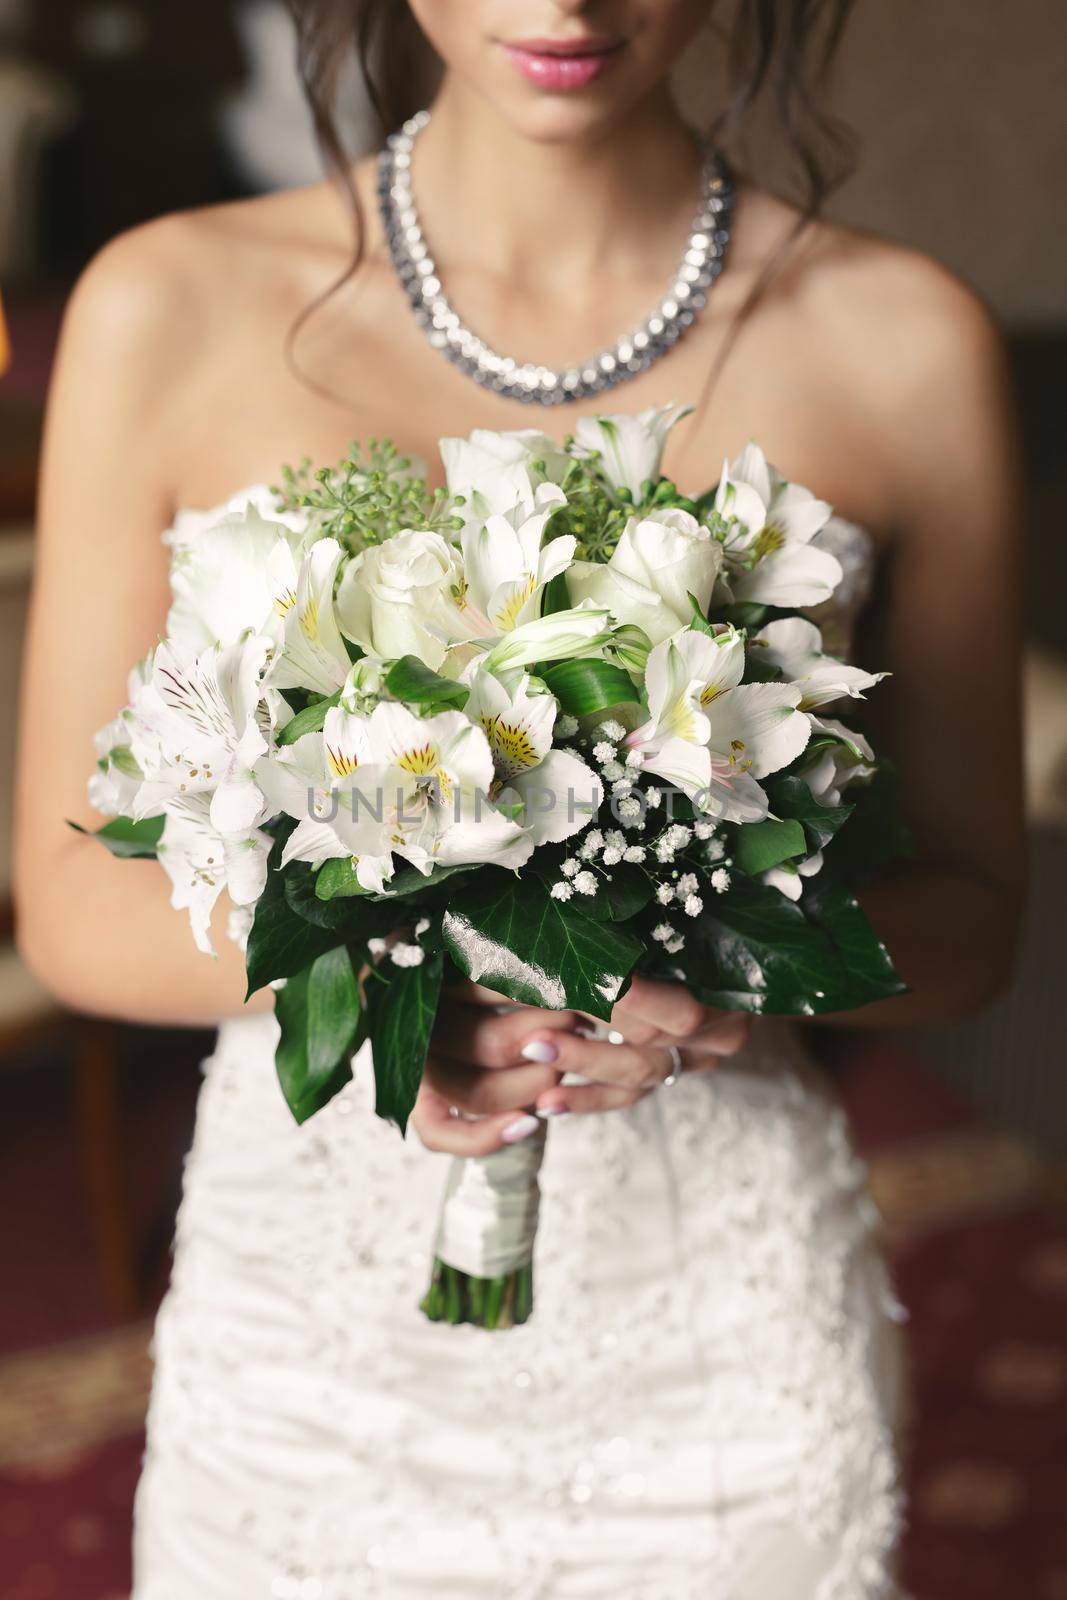 Close-up of a bouquet of flowers in the hands of the bride.